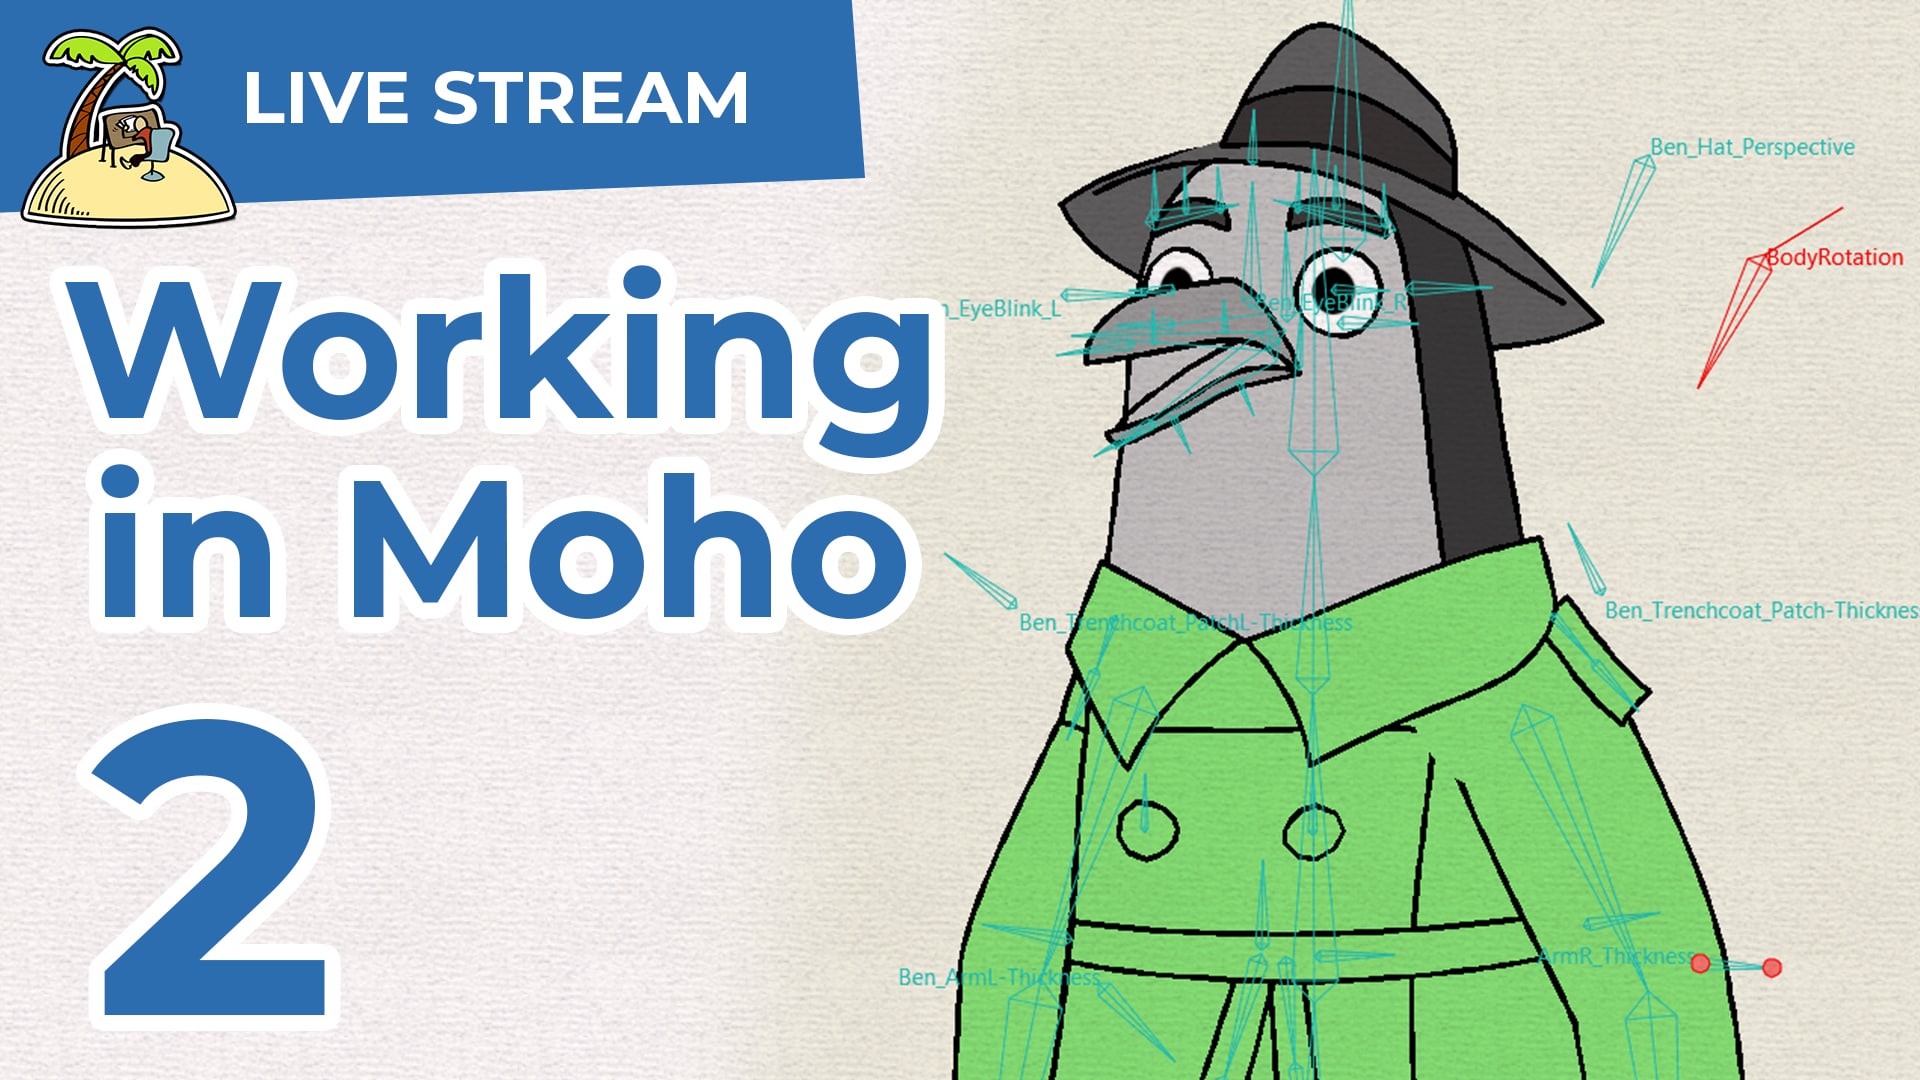 Rigging and animation in Moho - live stream - Animator Island